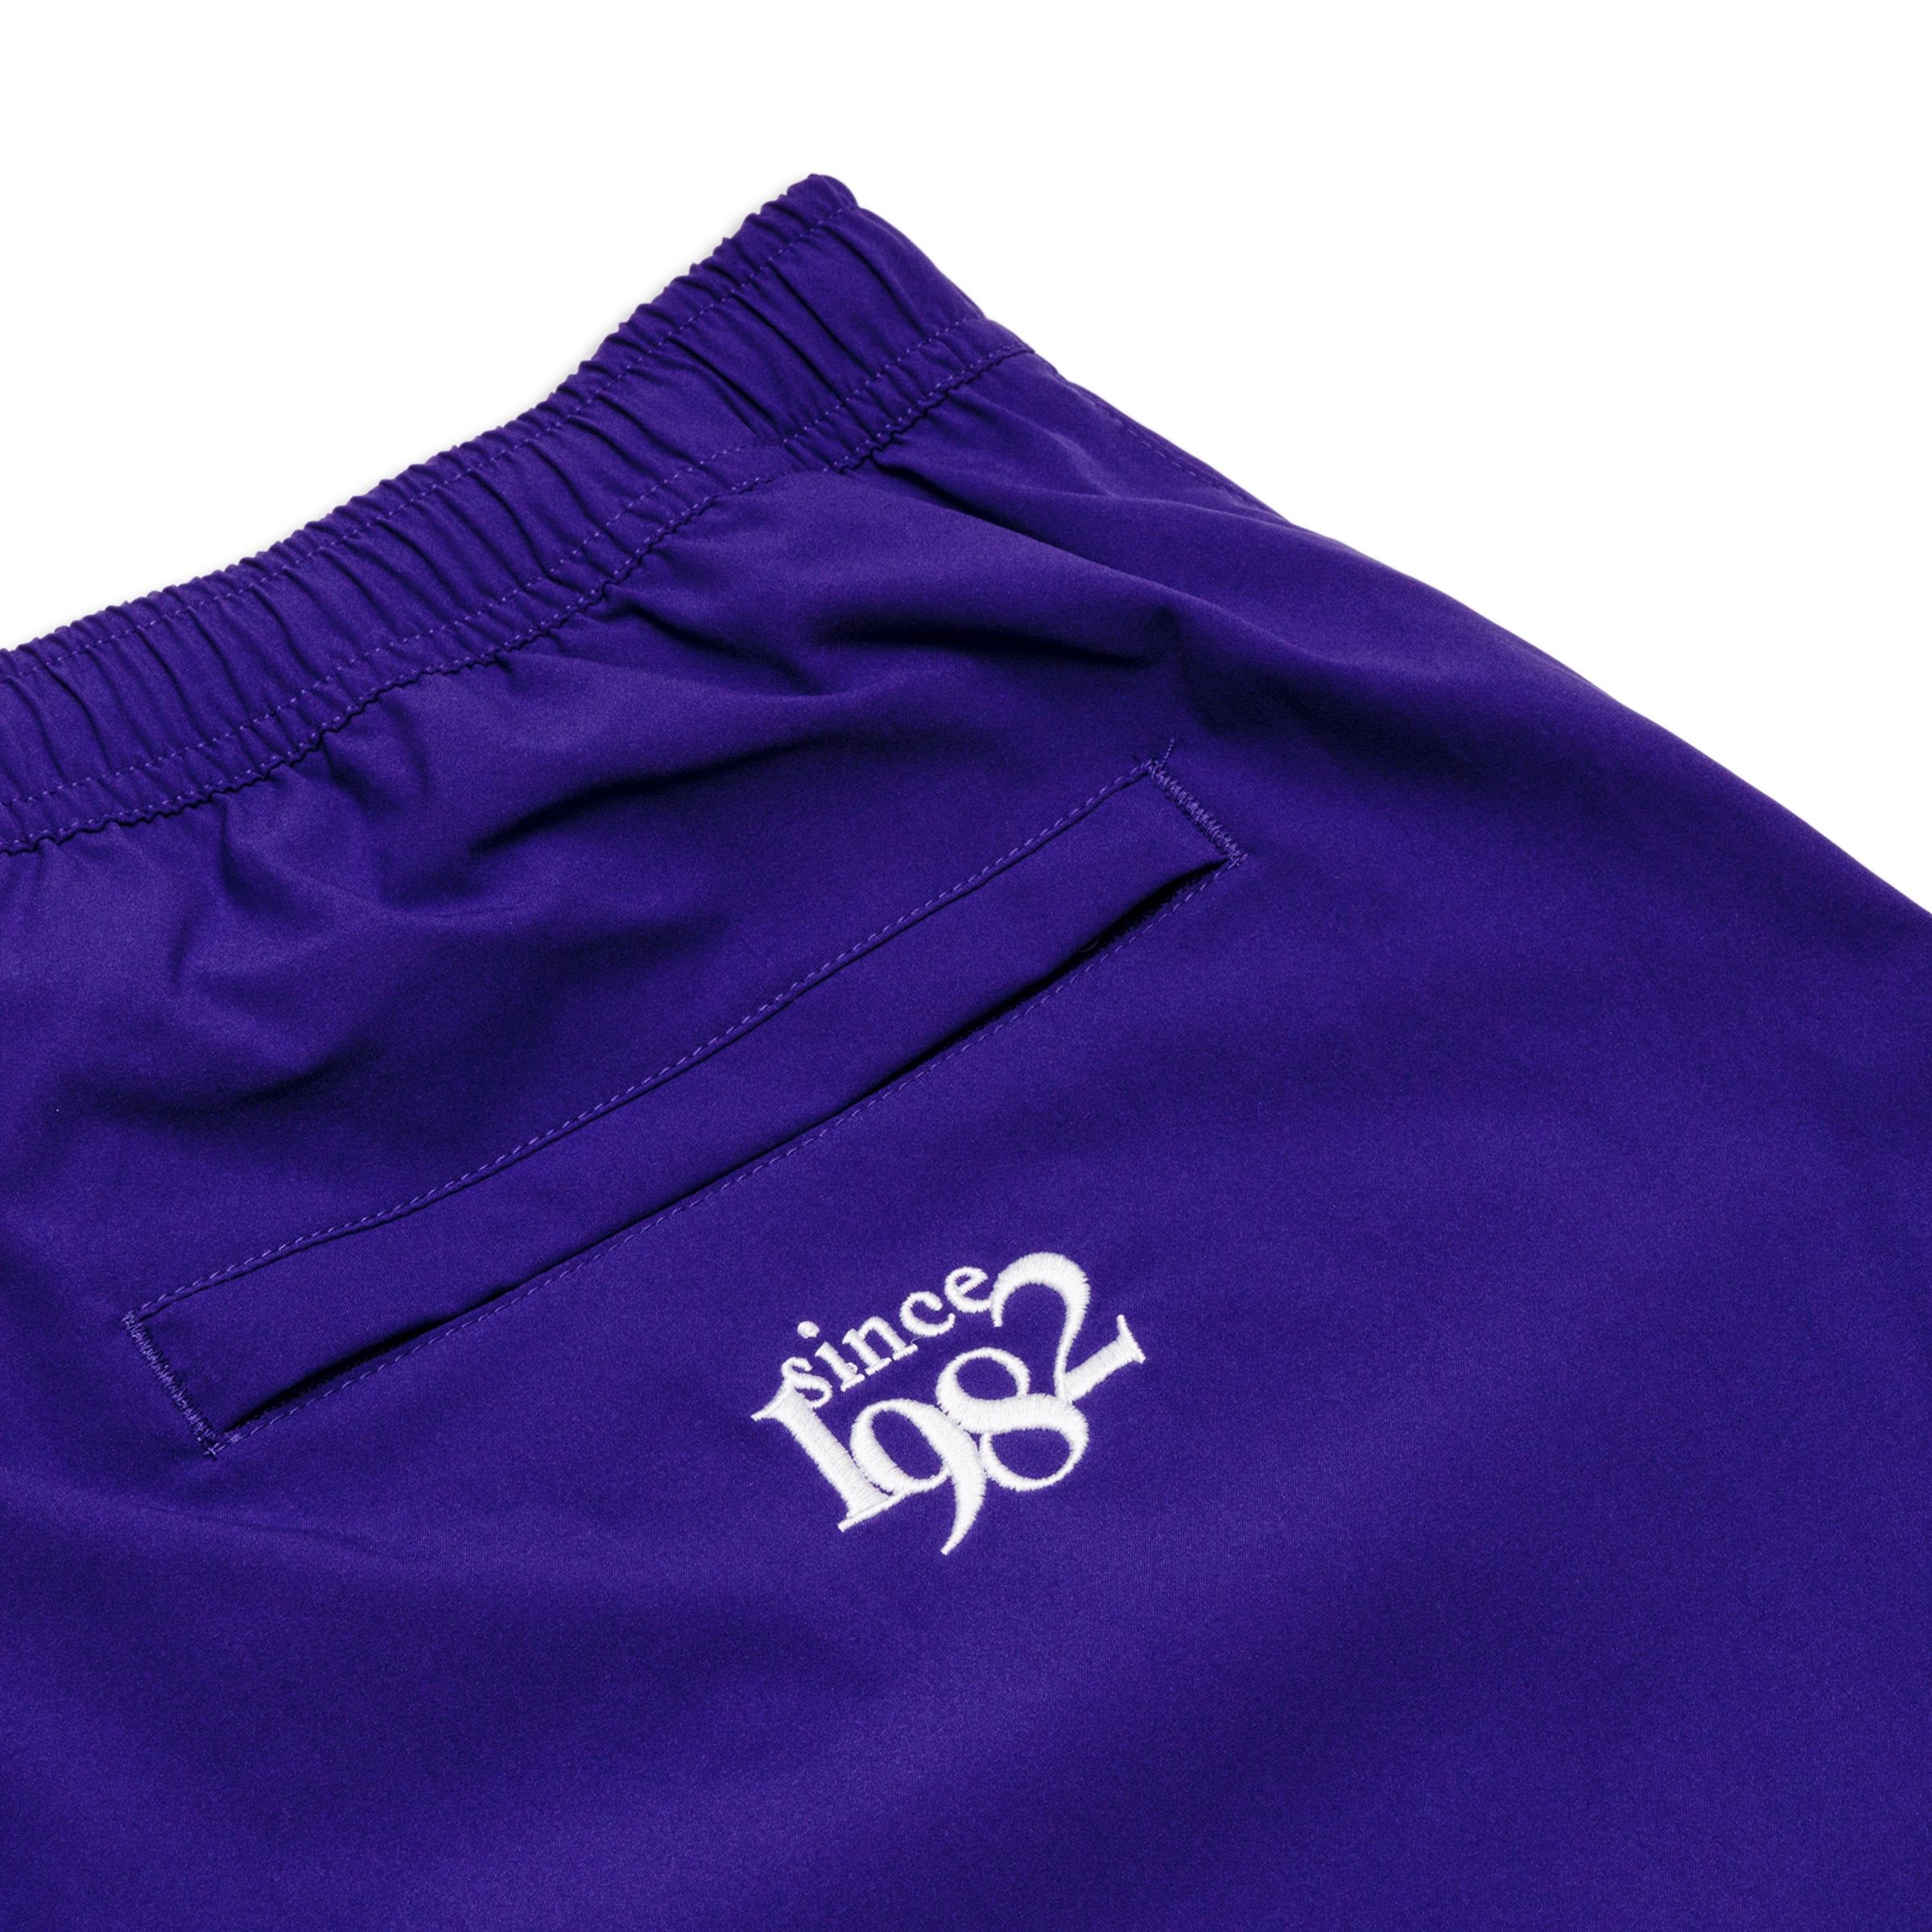 Grape Since Flag Side Print Every Day Shorts